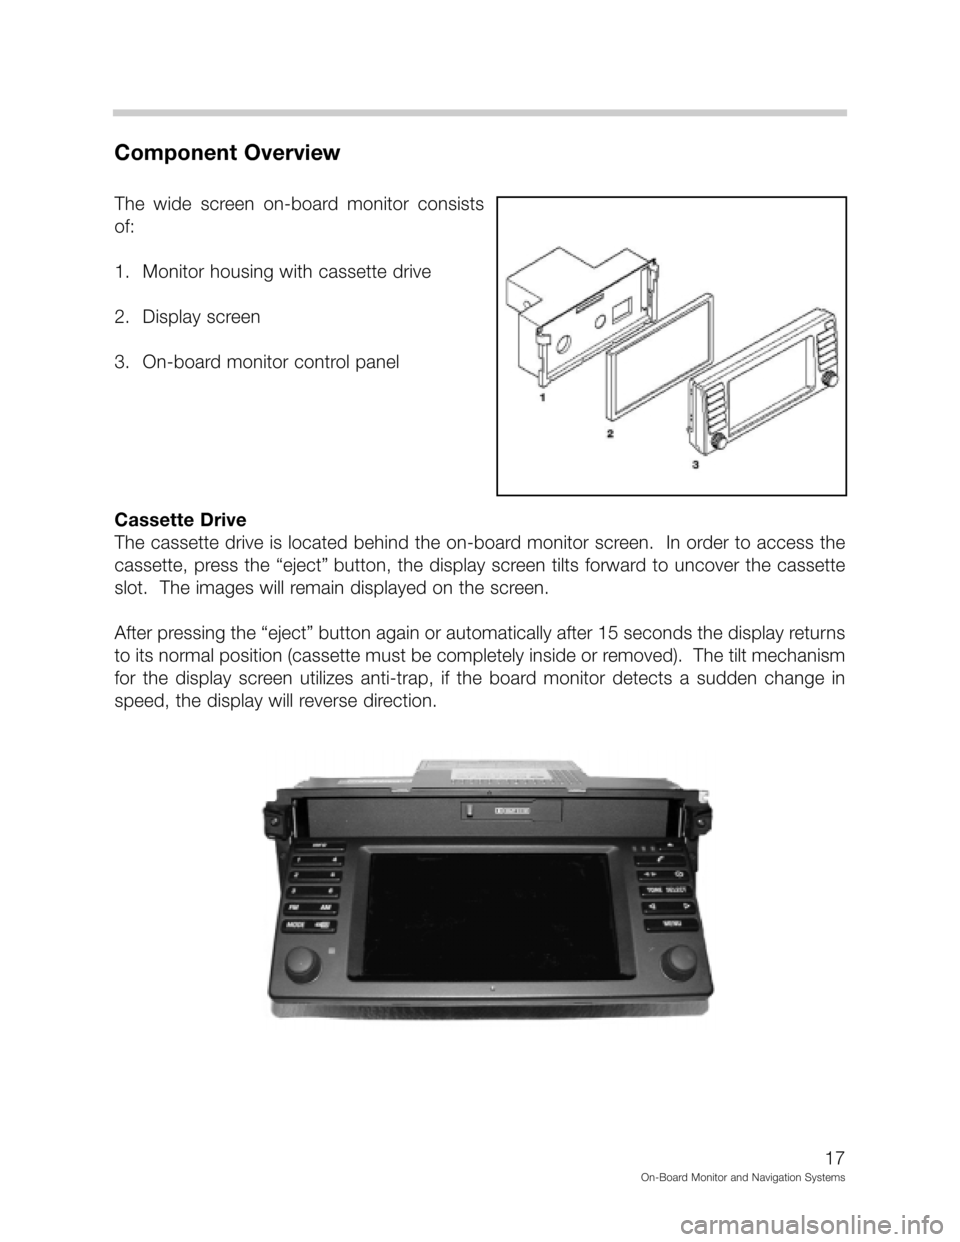 BMW 7 SERIES 1998 E38 On Board Monitor System User Guide *,



"&
(	
2./!!,, 7
# % 
 
 	
 


* 

%&
 

. 
	


